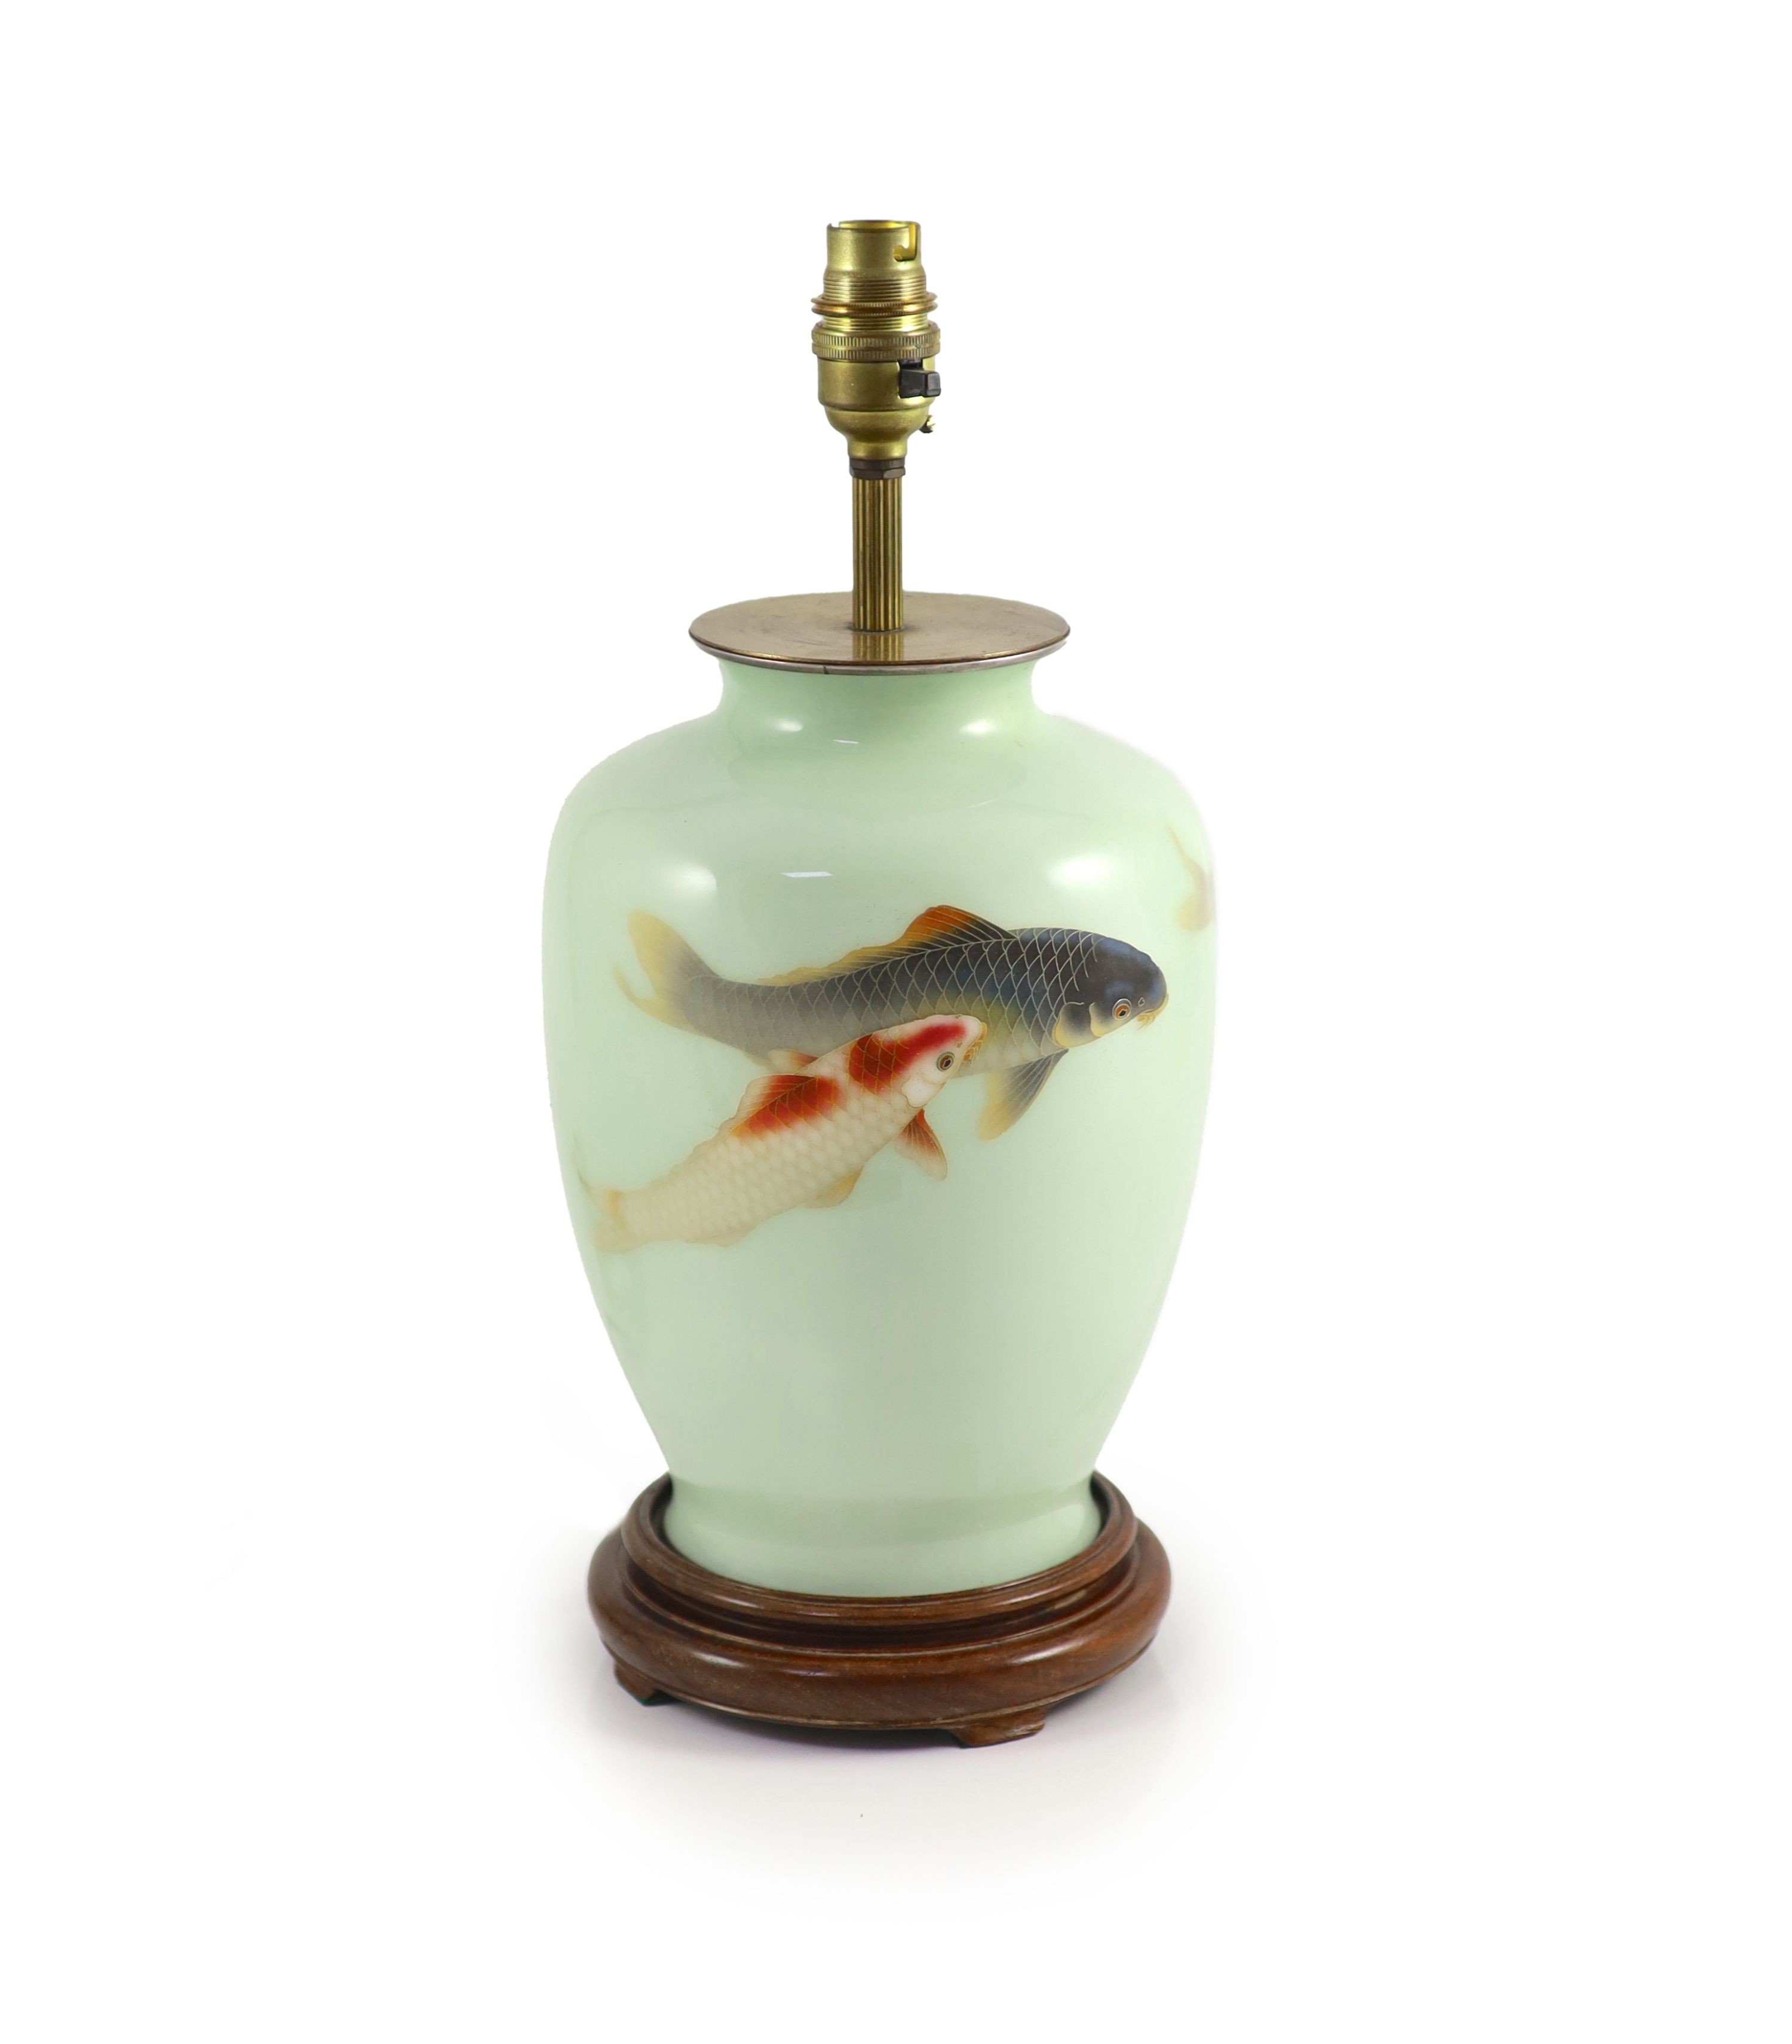 A Japanese cloisonné vase mounted as a lamp, attributed to Ando, mid 20th century 24cm high, base drilled                                                                                                                   